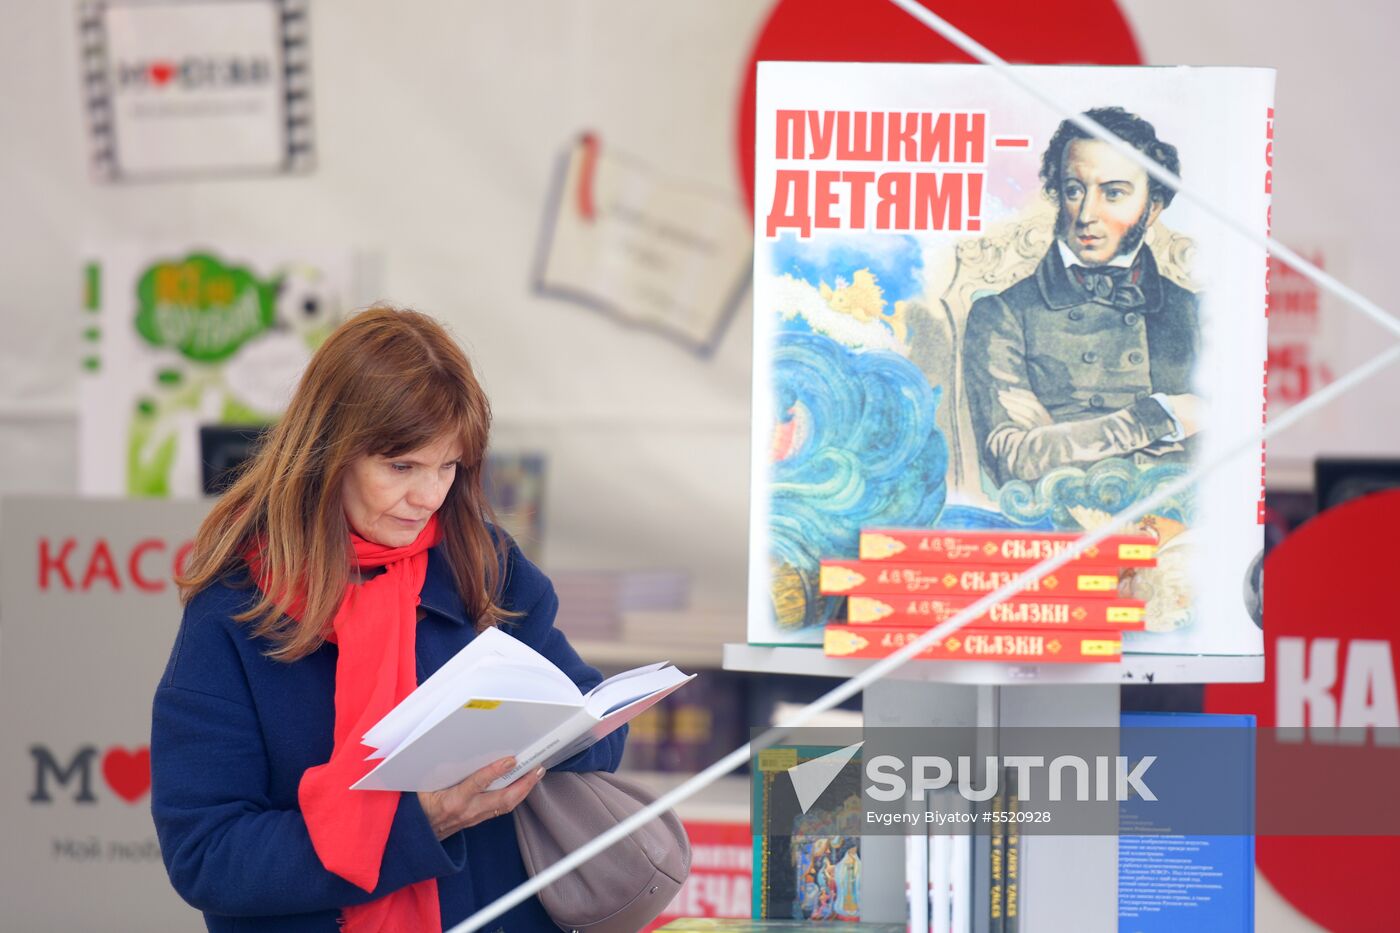 Pushkin Day at Red Square book festival